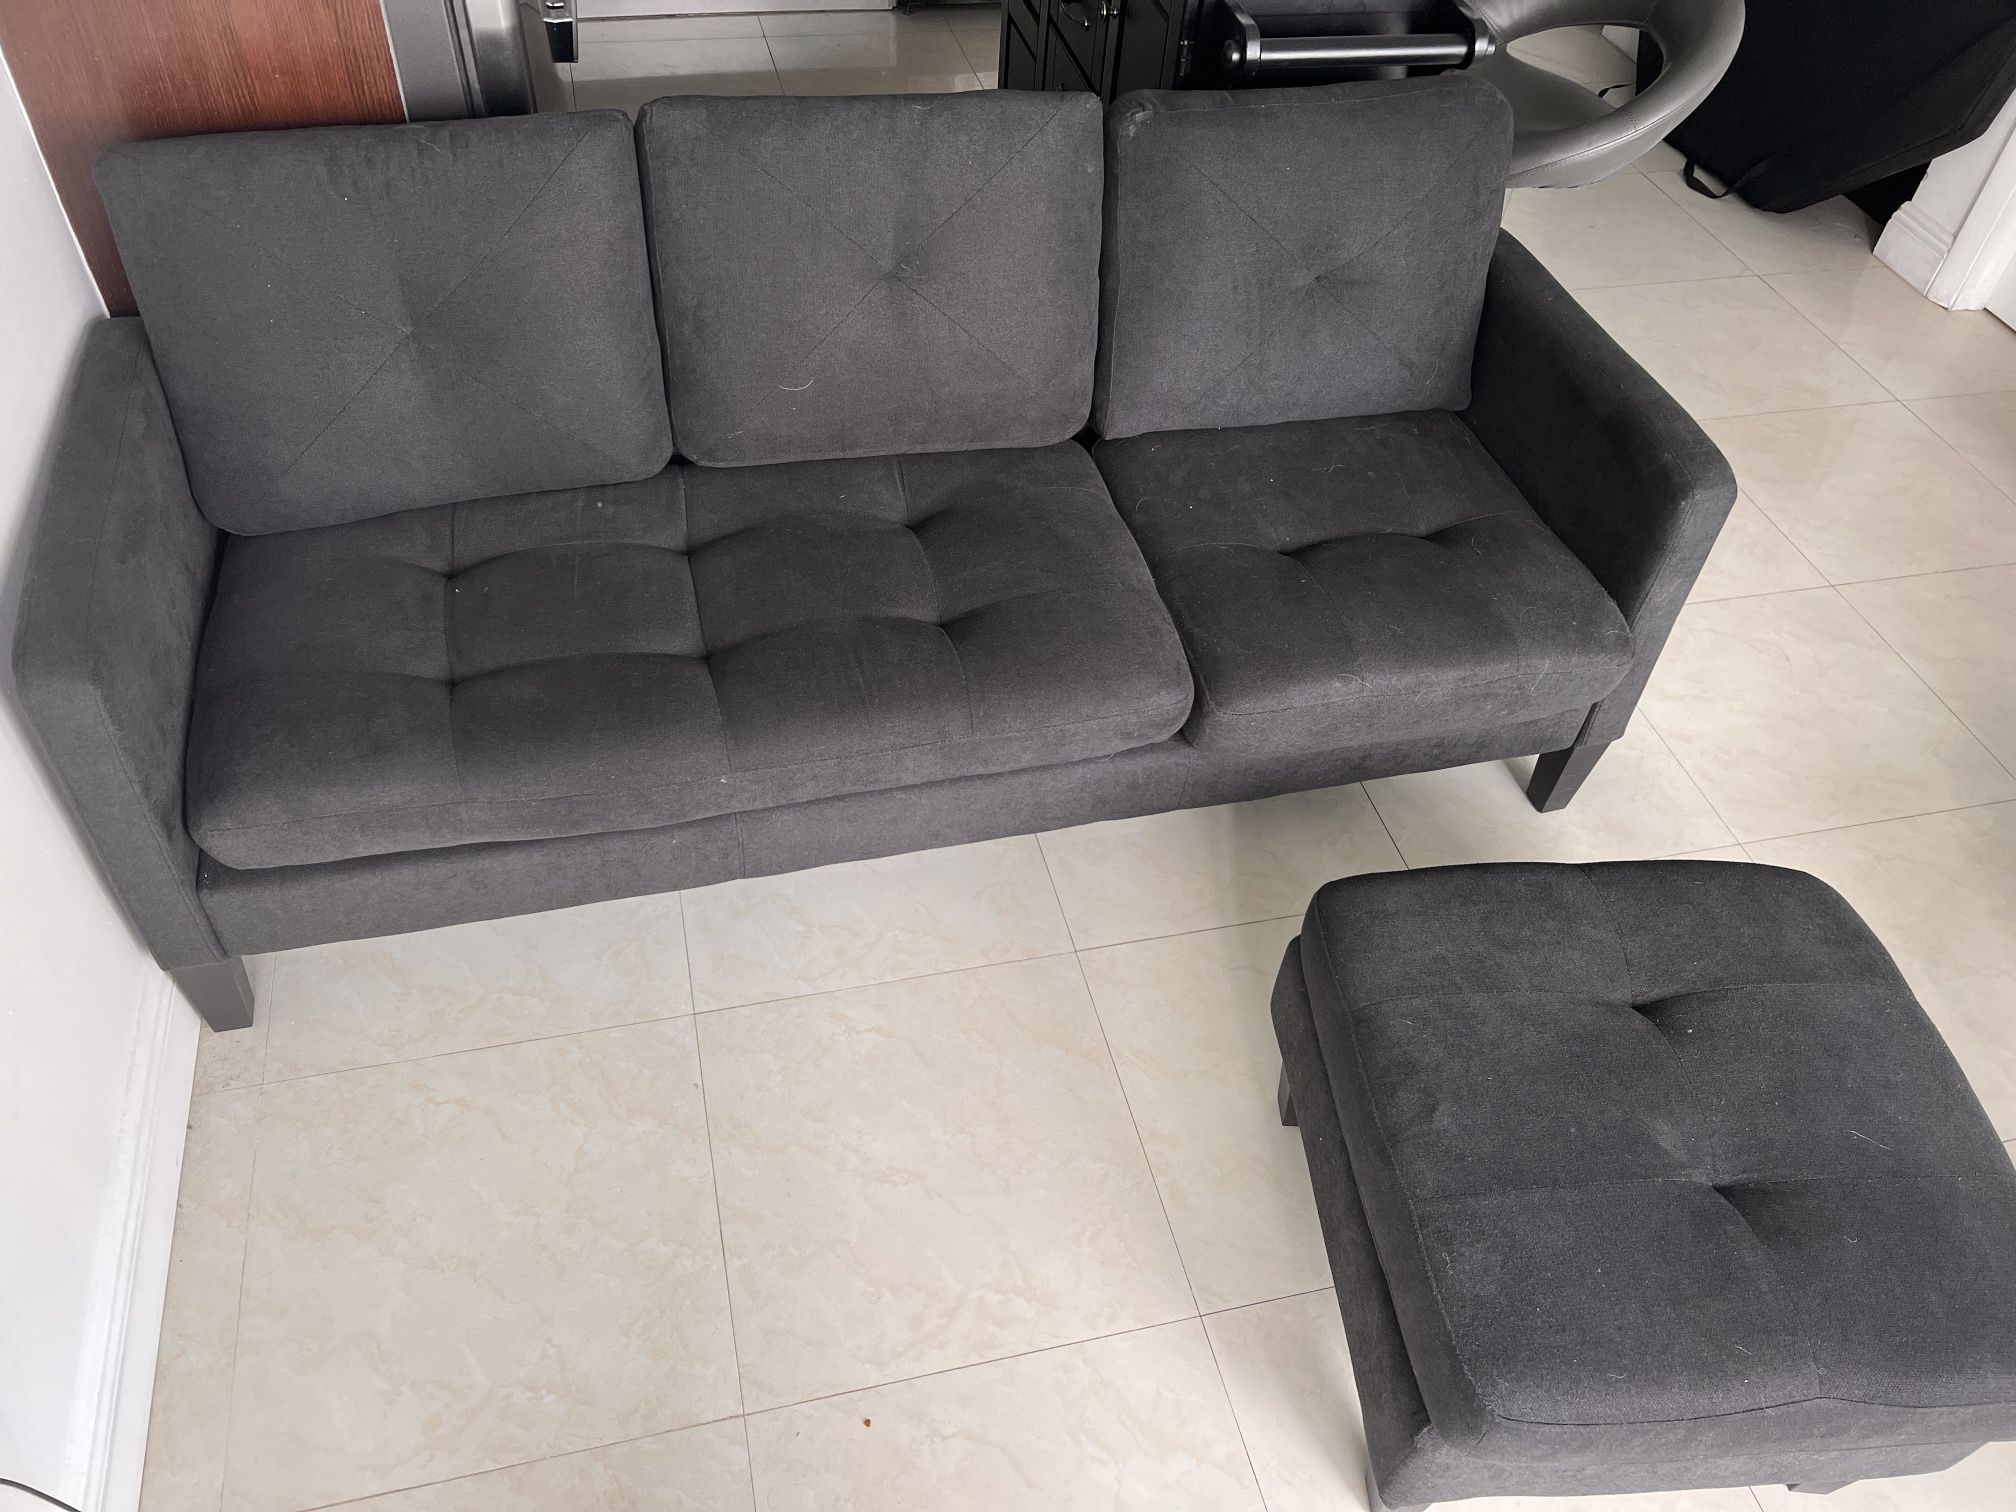 Sectional Couch 3 Positions $195